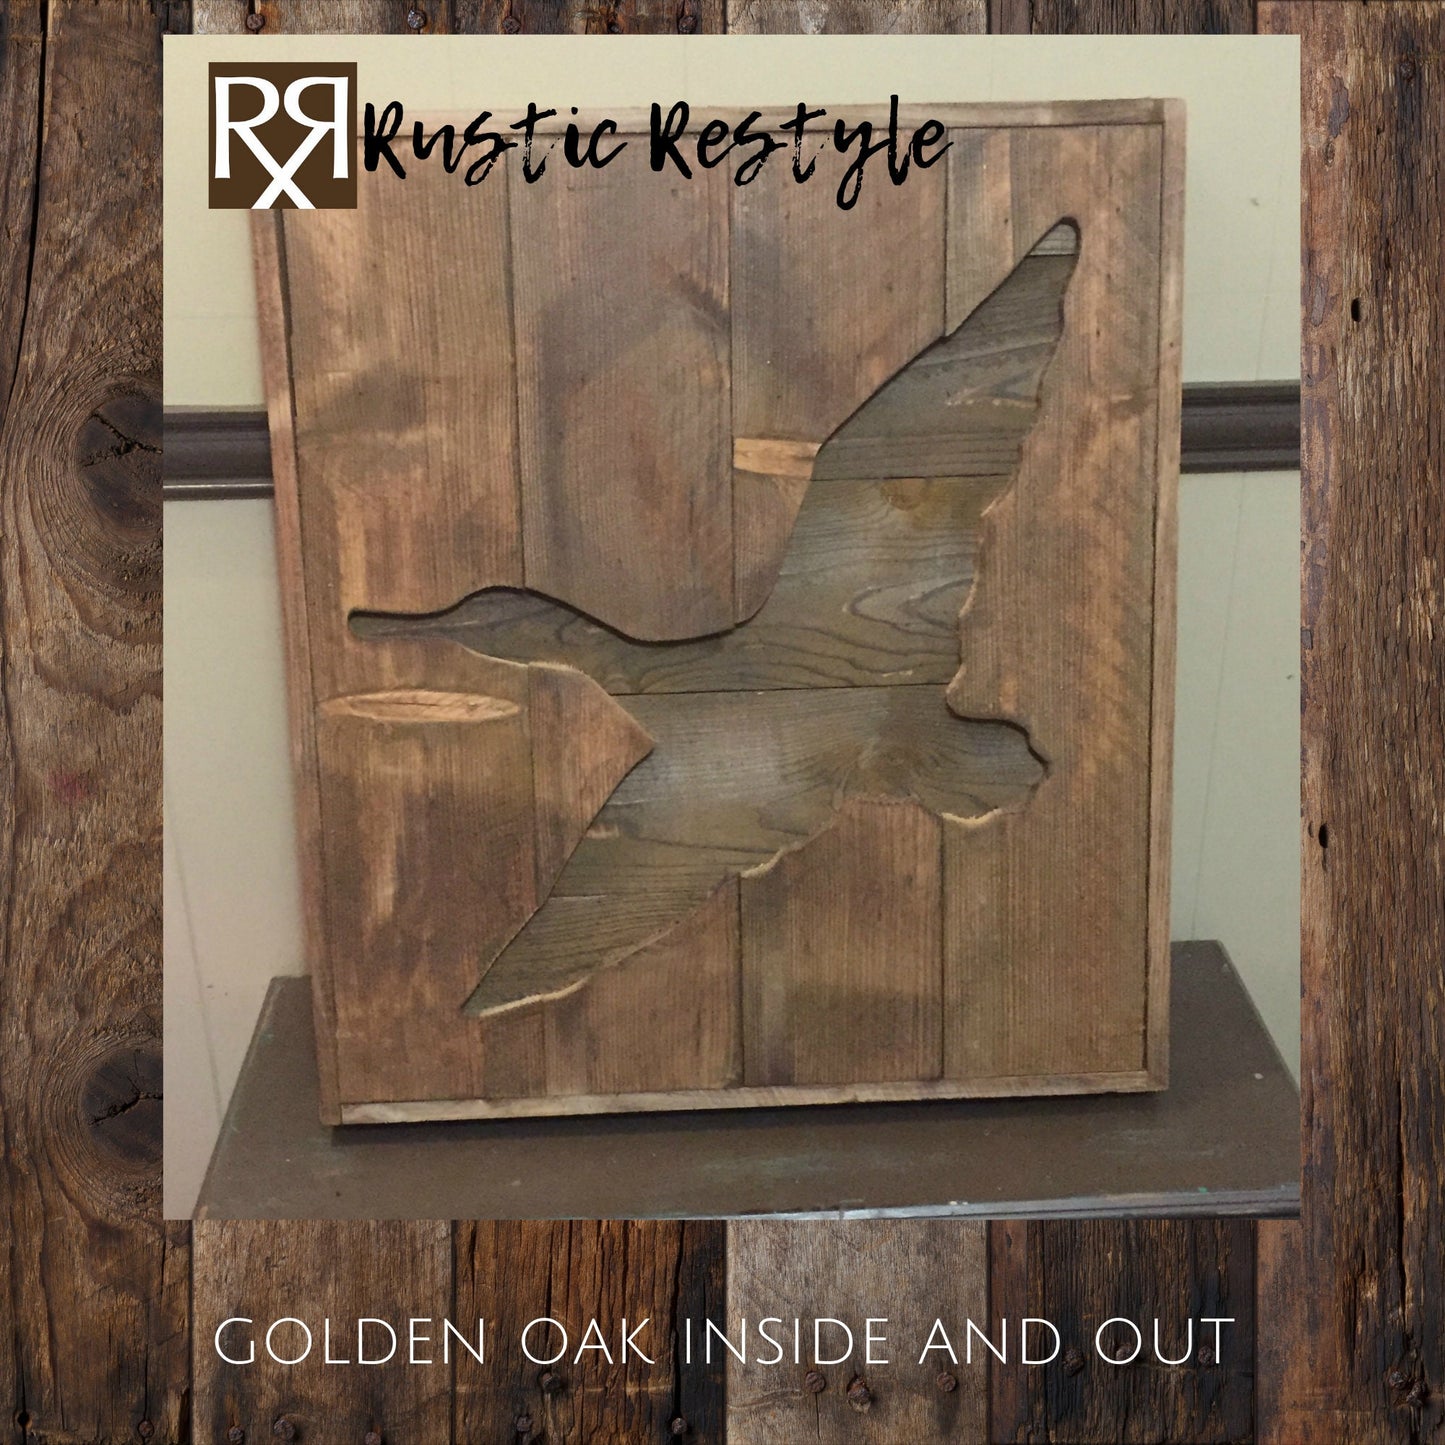 Rustic Wood Duck Hunting sign, Large Wood Pallet wall art, Rustic home decor and Hunting gifts for him/dad/man/hunters